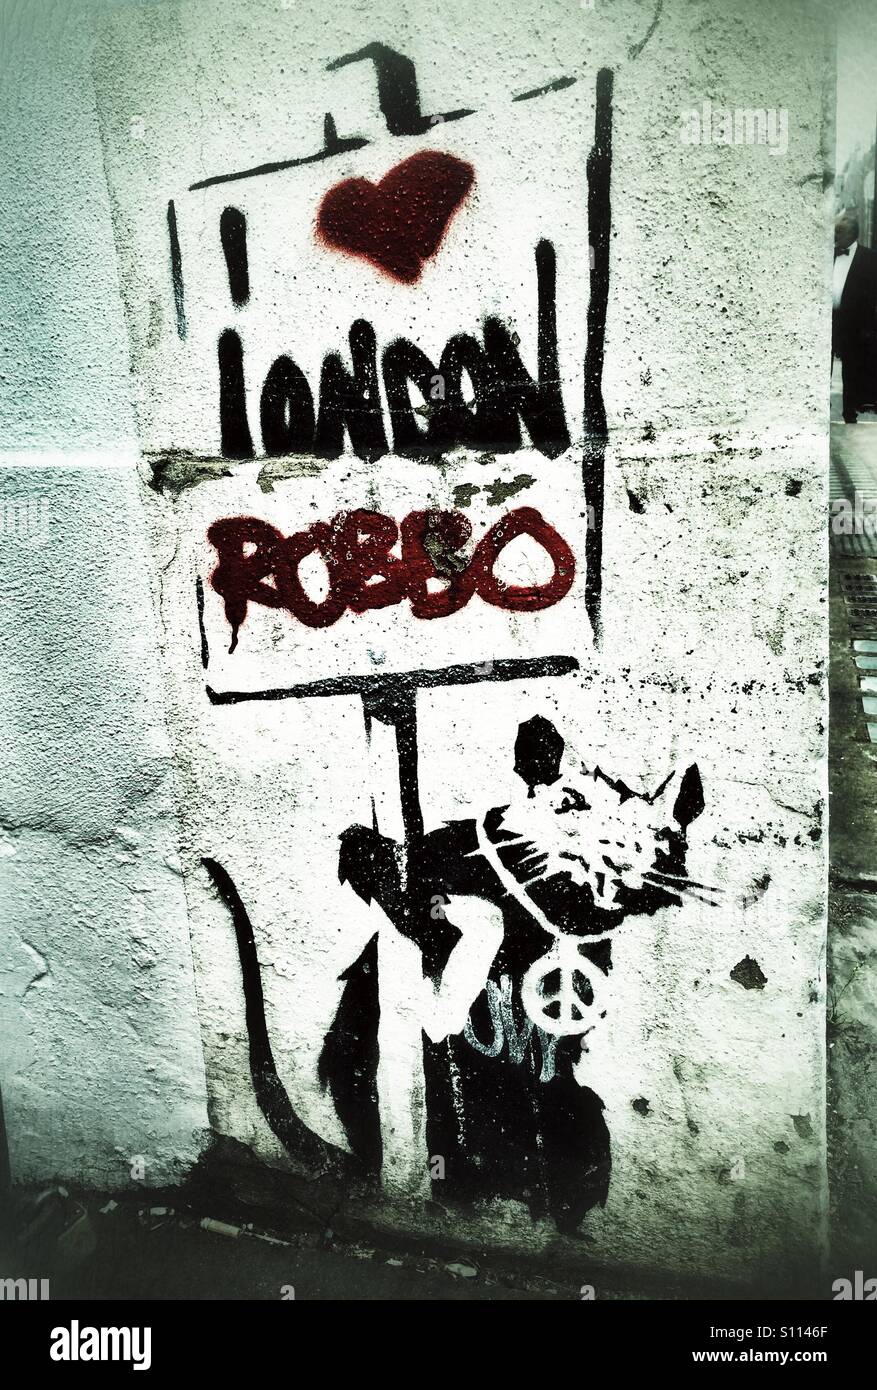 'I love London' graffiti - rat holding a placard done Banksy style but signed by Robbo. Stock Photo